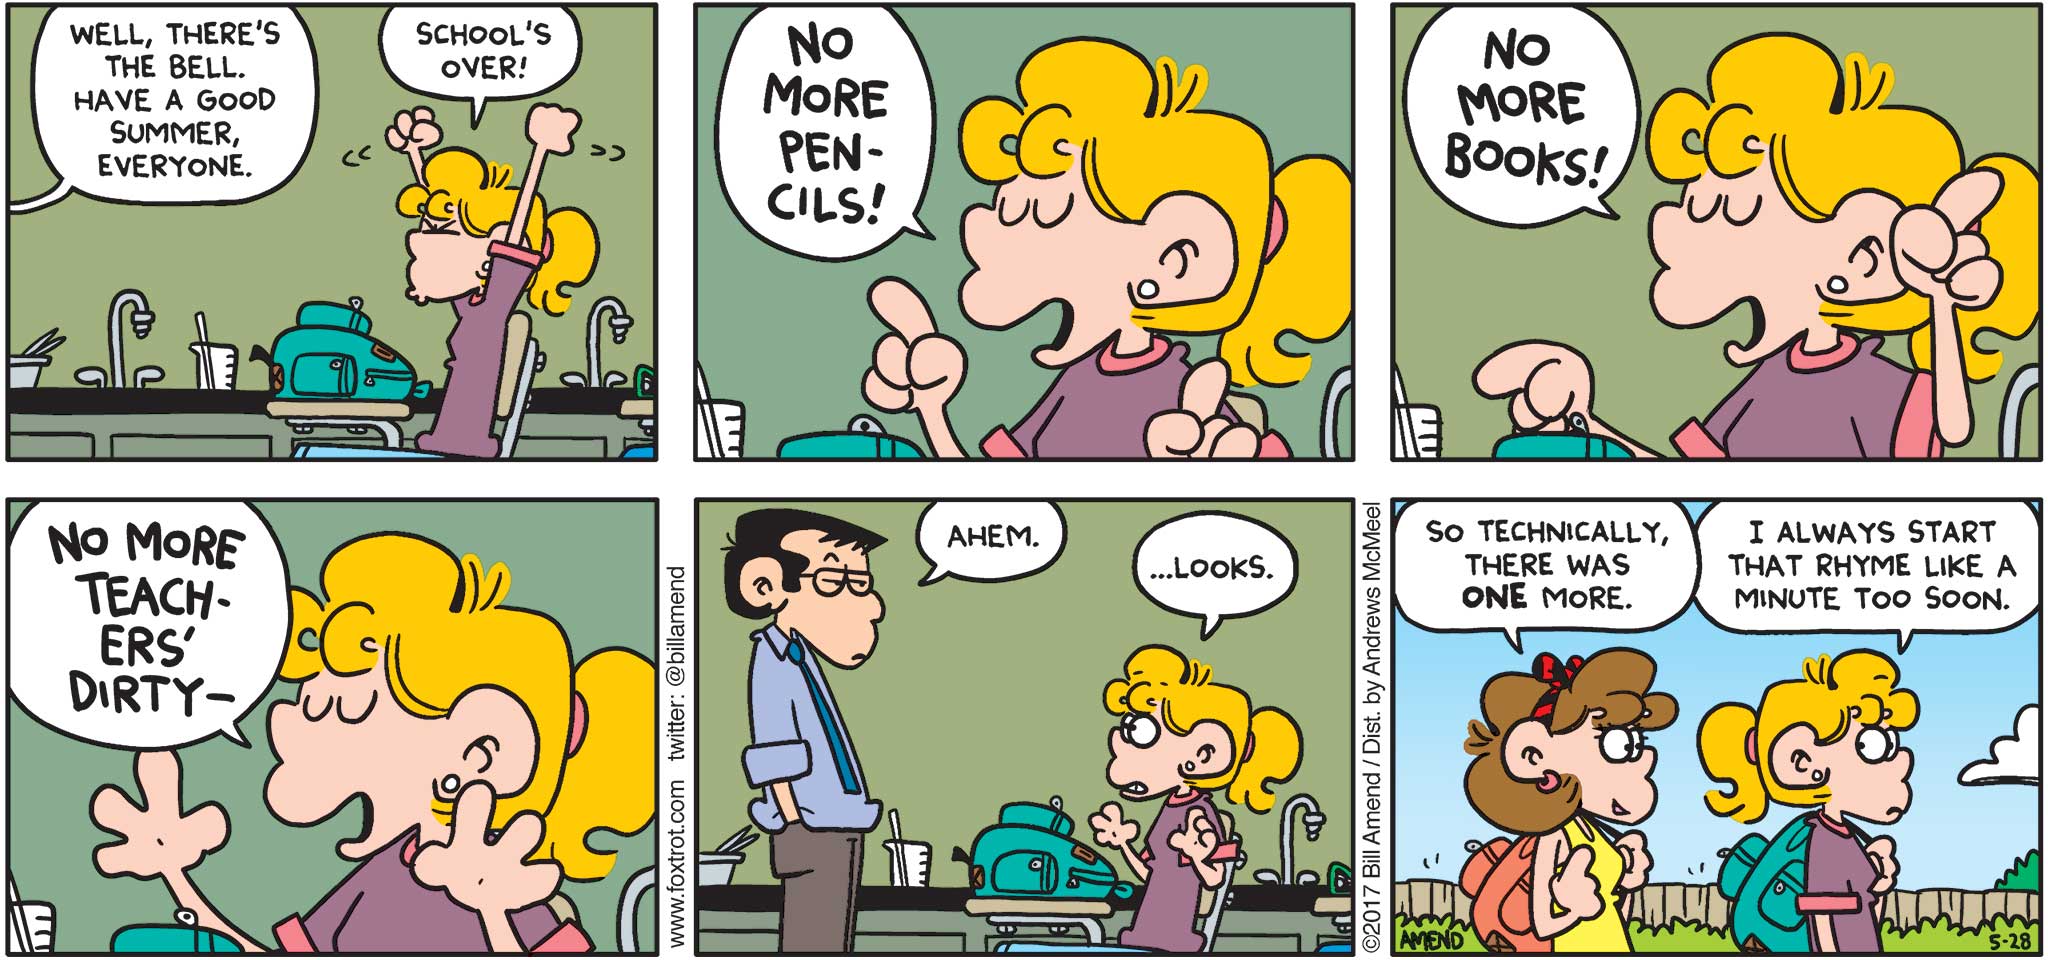 FoxTrot by Bill Amend - "Busted Rhymes" published May 28, 2017 - Teacher says: Well, there's the bell. Have a good summer everyone. Paige says: School's over! No more pencils! No more books! No more teachers' dirty-- Teacher says: Ahem. Paige says: ...looks. Nicole says: So, technically there was ONE more. Paige says: I always start that rhyme like a minute too soon. 